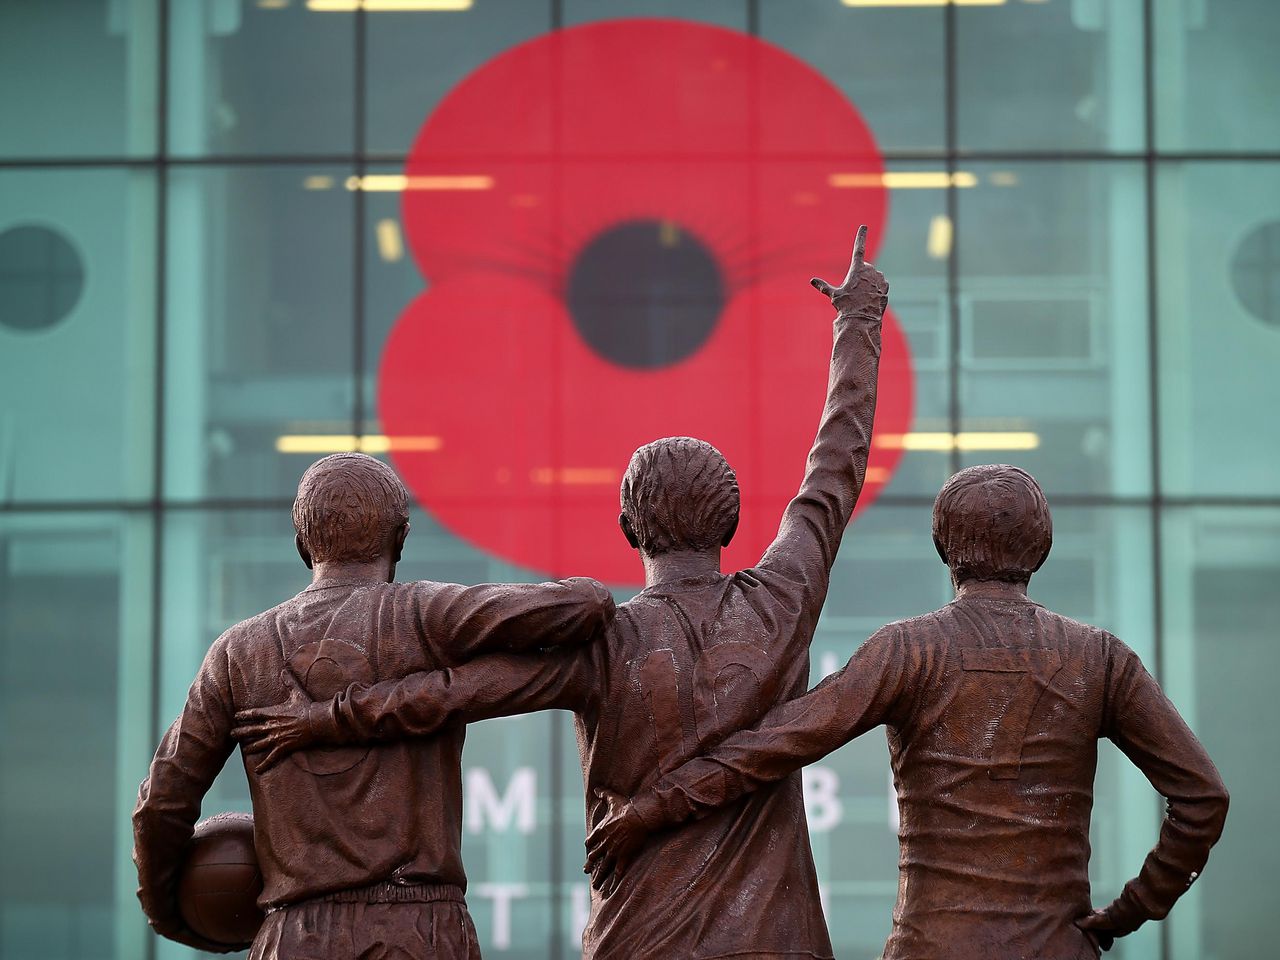 Poppy tribute for Remembrance on the East Stand window at Old Trafford